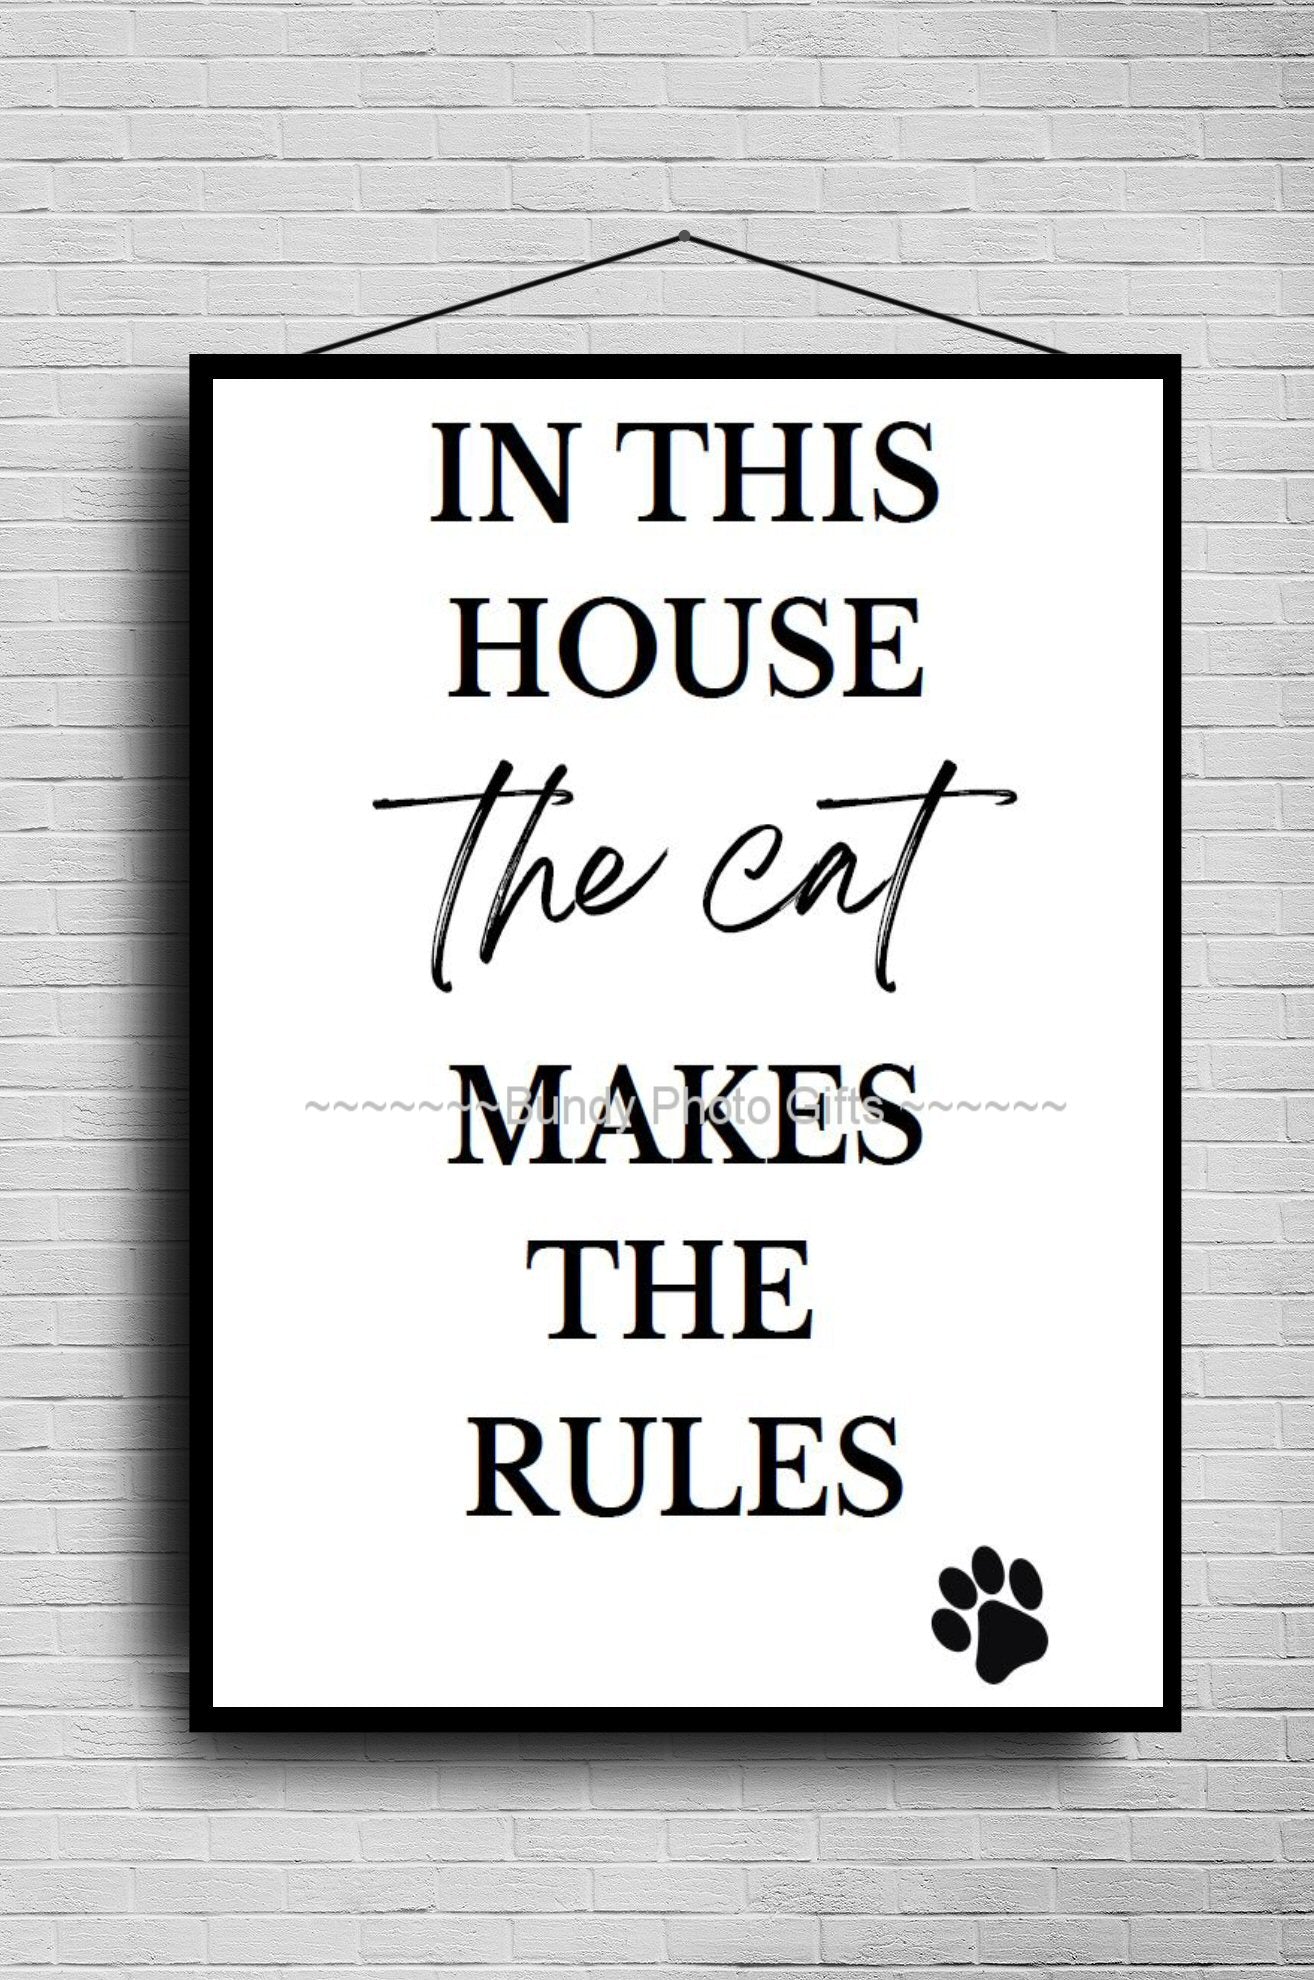 Wall Art - In this house the Cat makes the rules - Living Room Funny Art